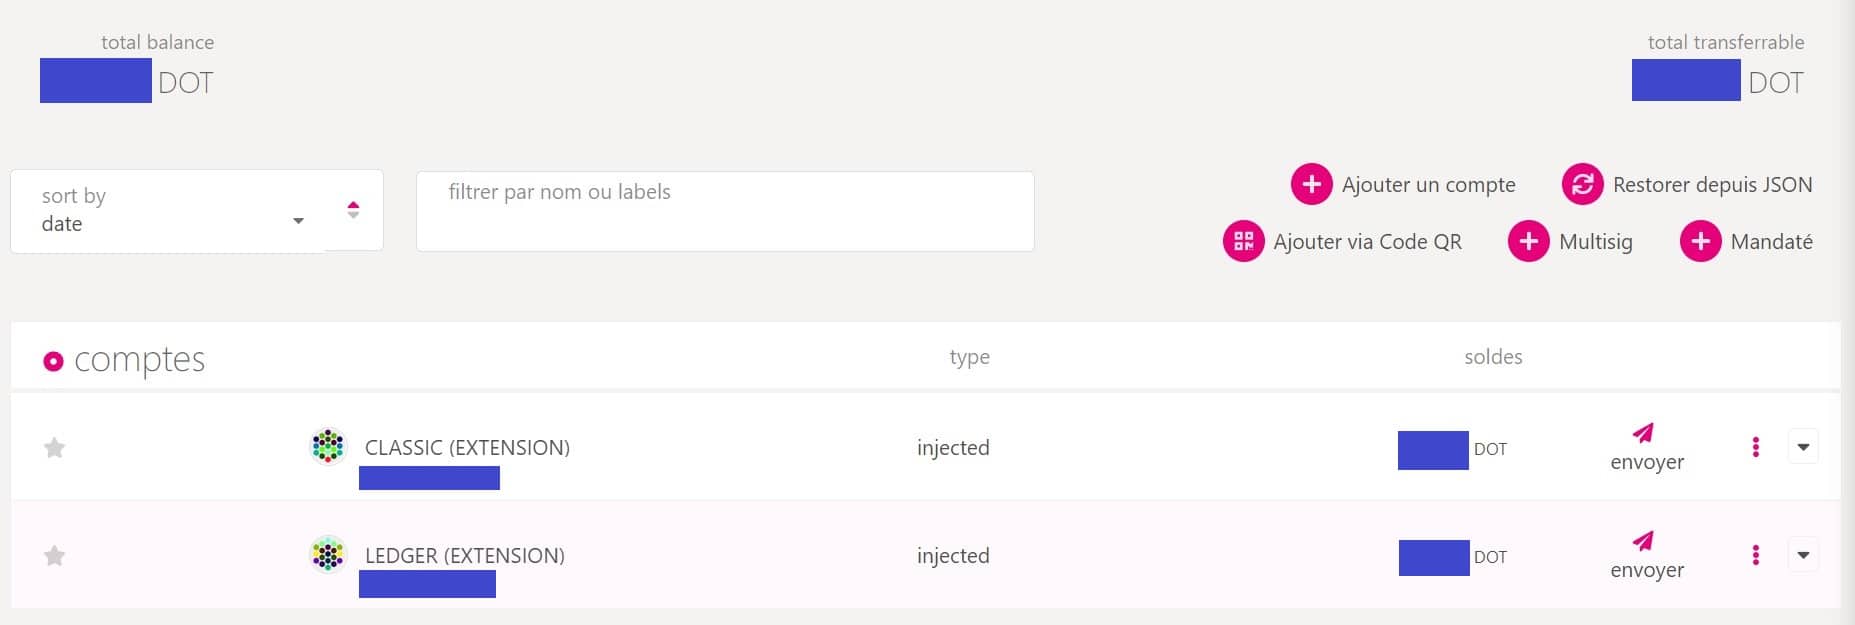 View of your different accounts on the Polkadot blockchain